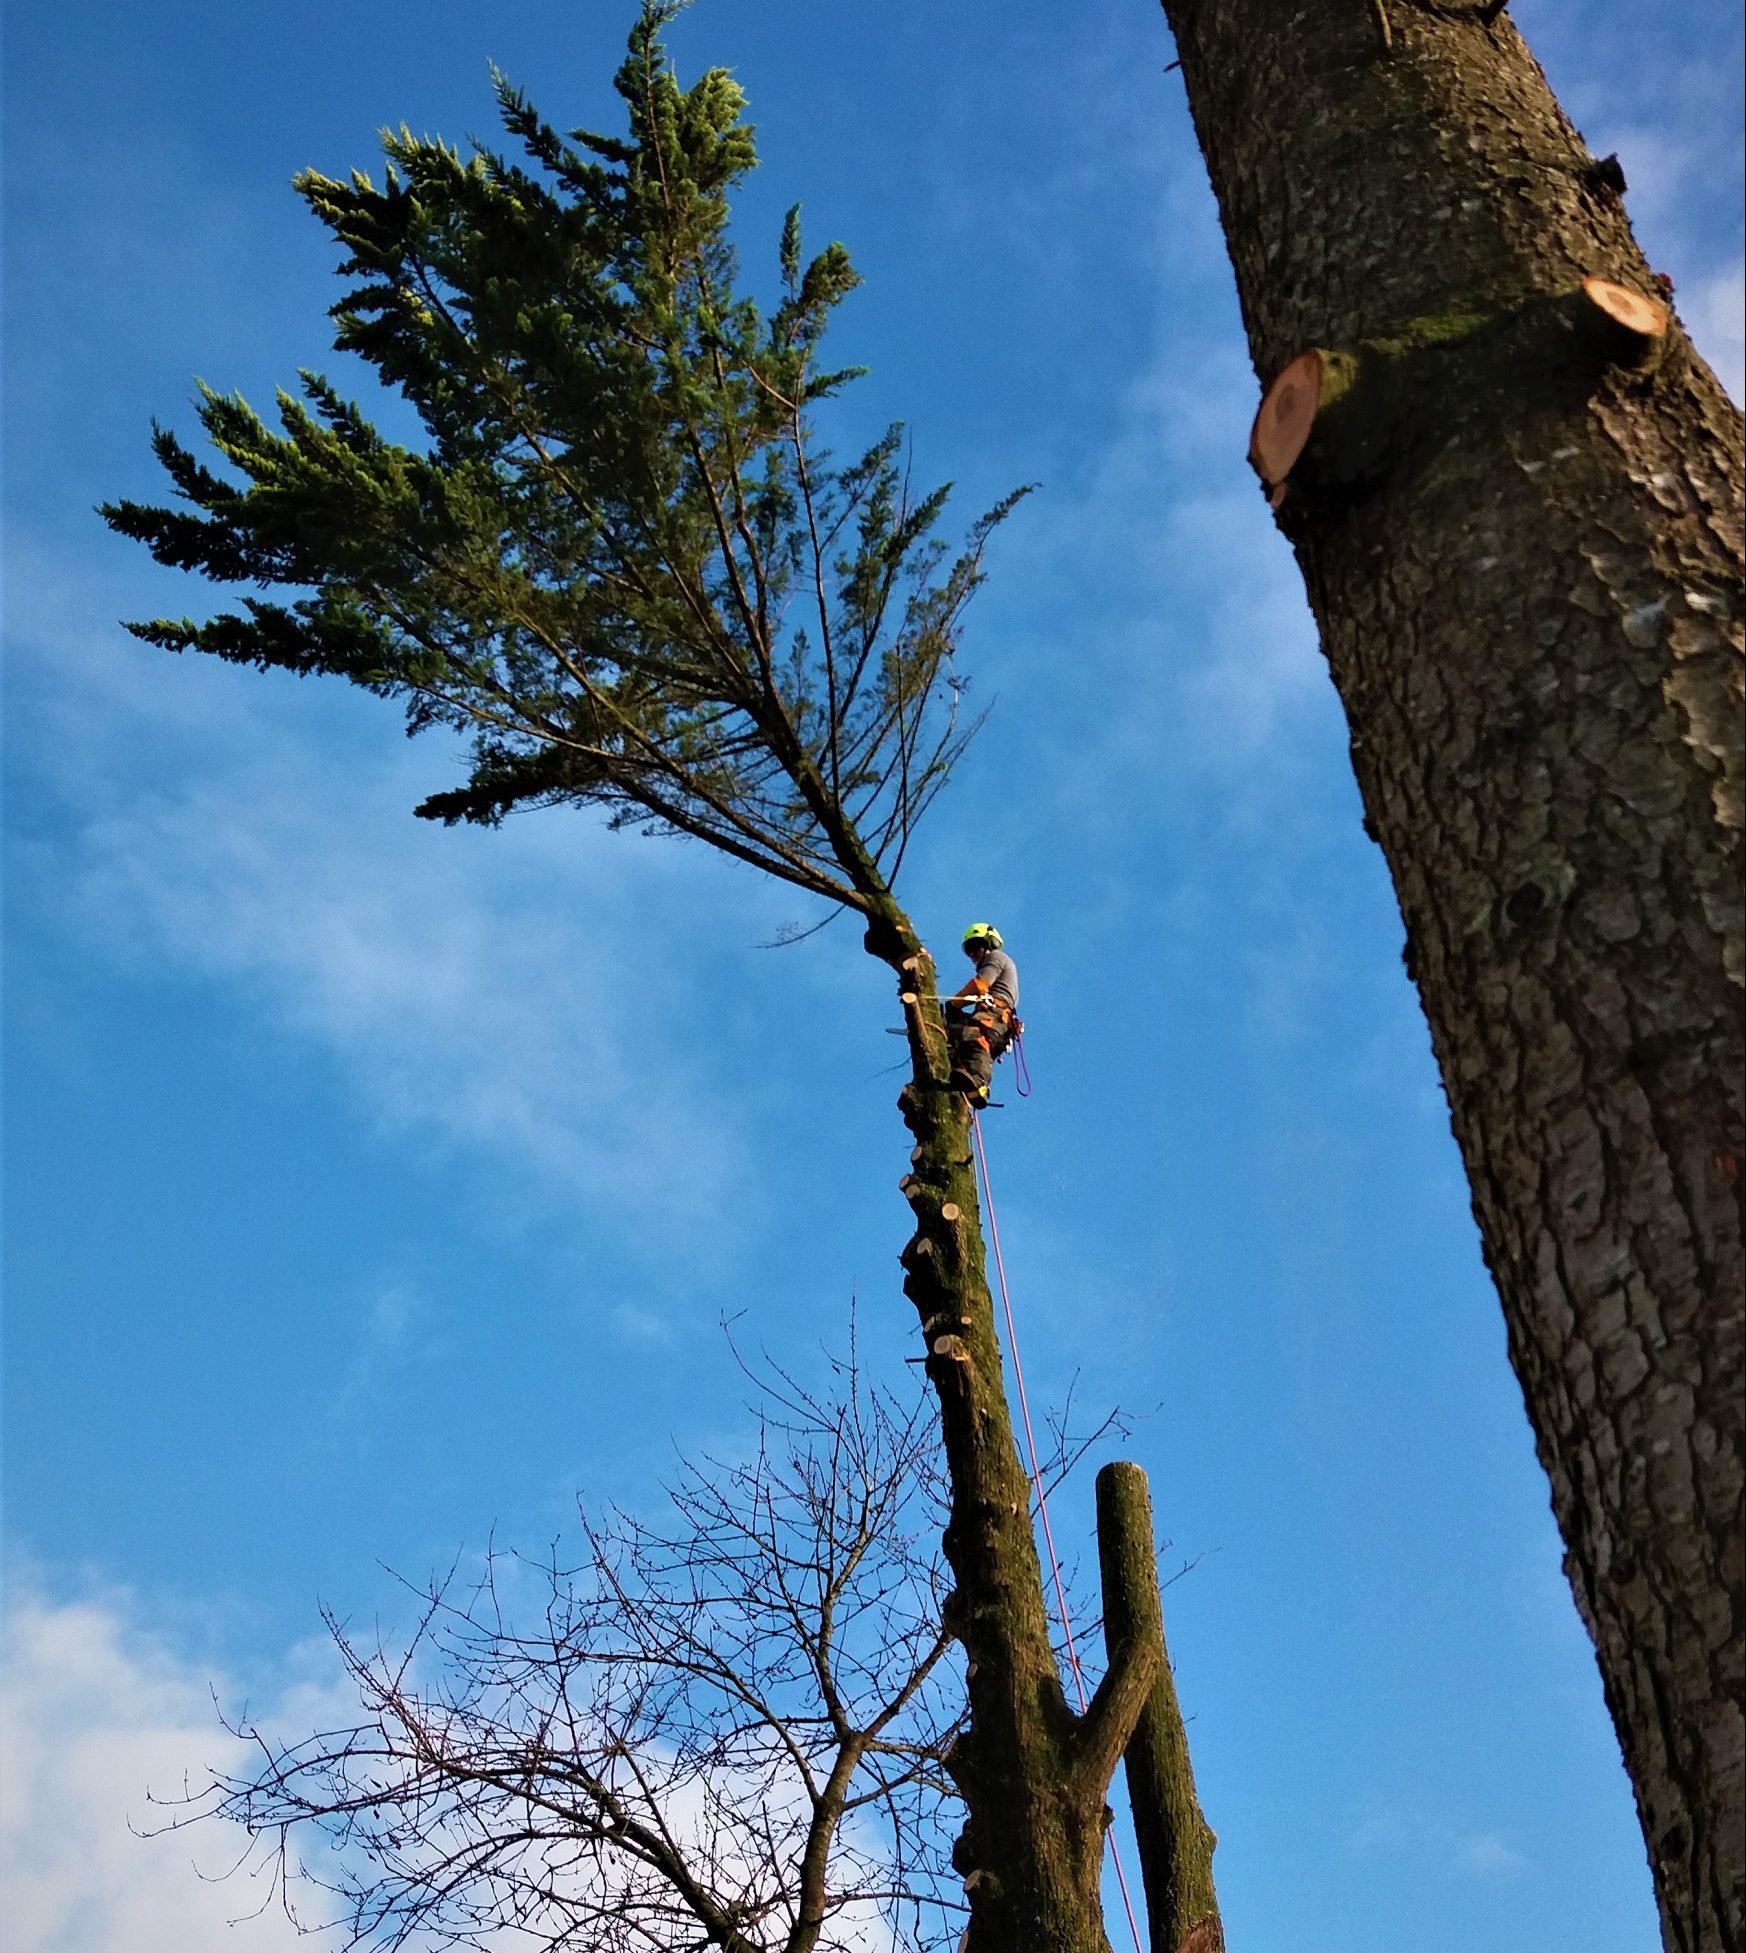 A man is on a very tall pine tree cutting its crown